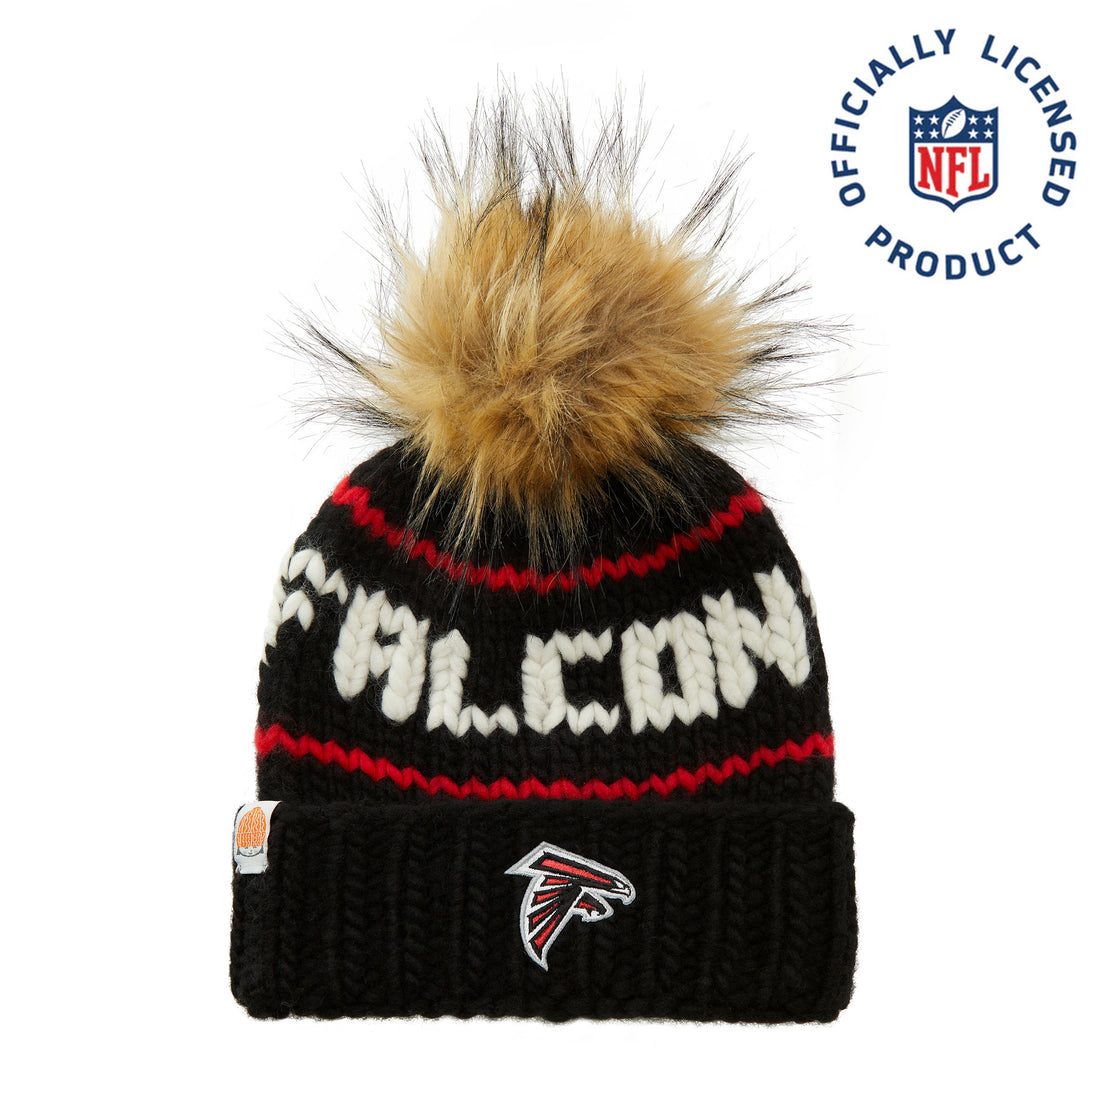 The Falcons NFL Beanie with Faux Fur Pom